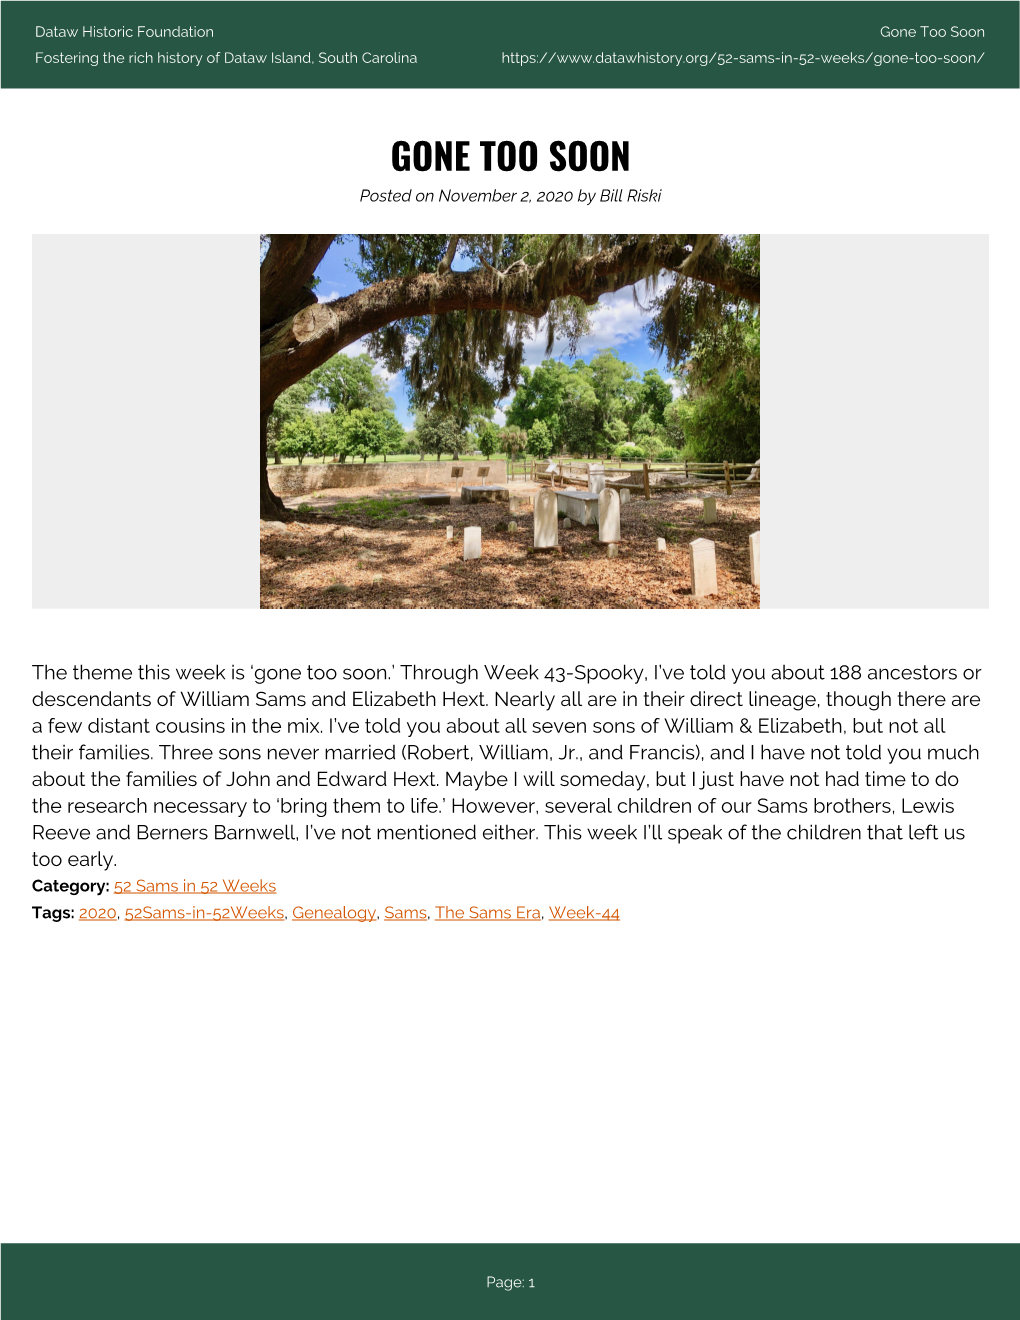 Gone Too Soon Fostering the Rich History of Dataw Island, South Carolina